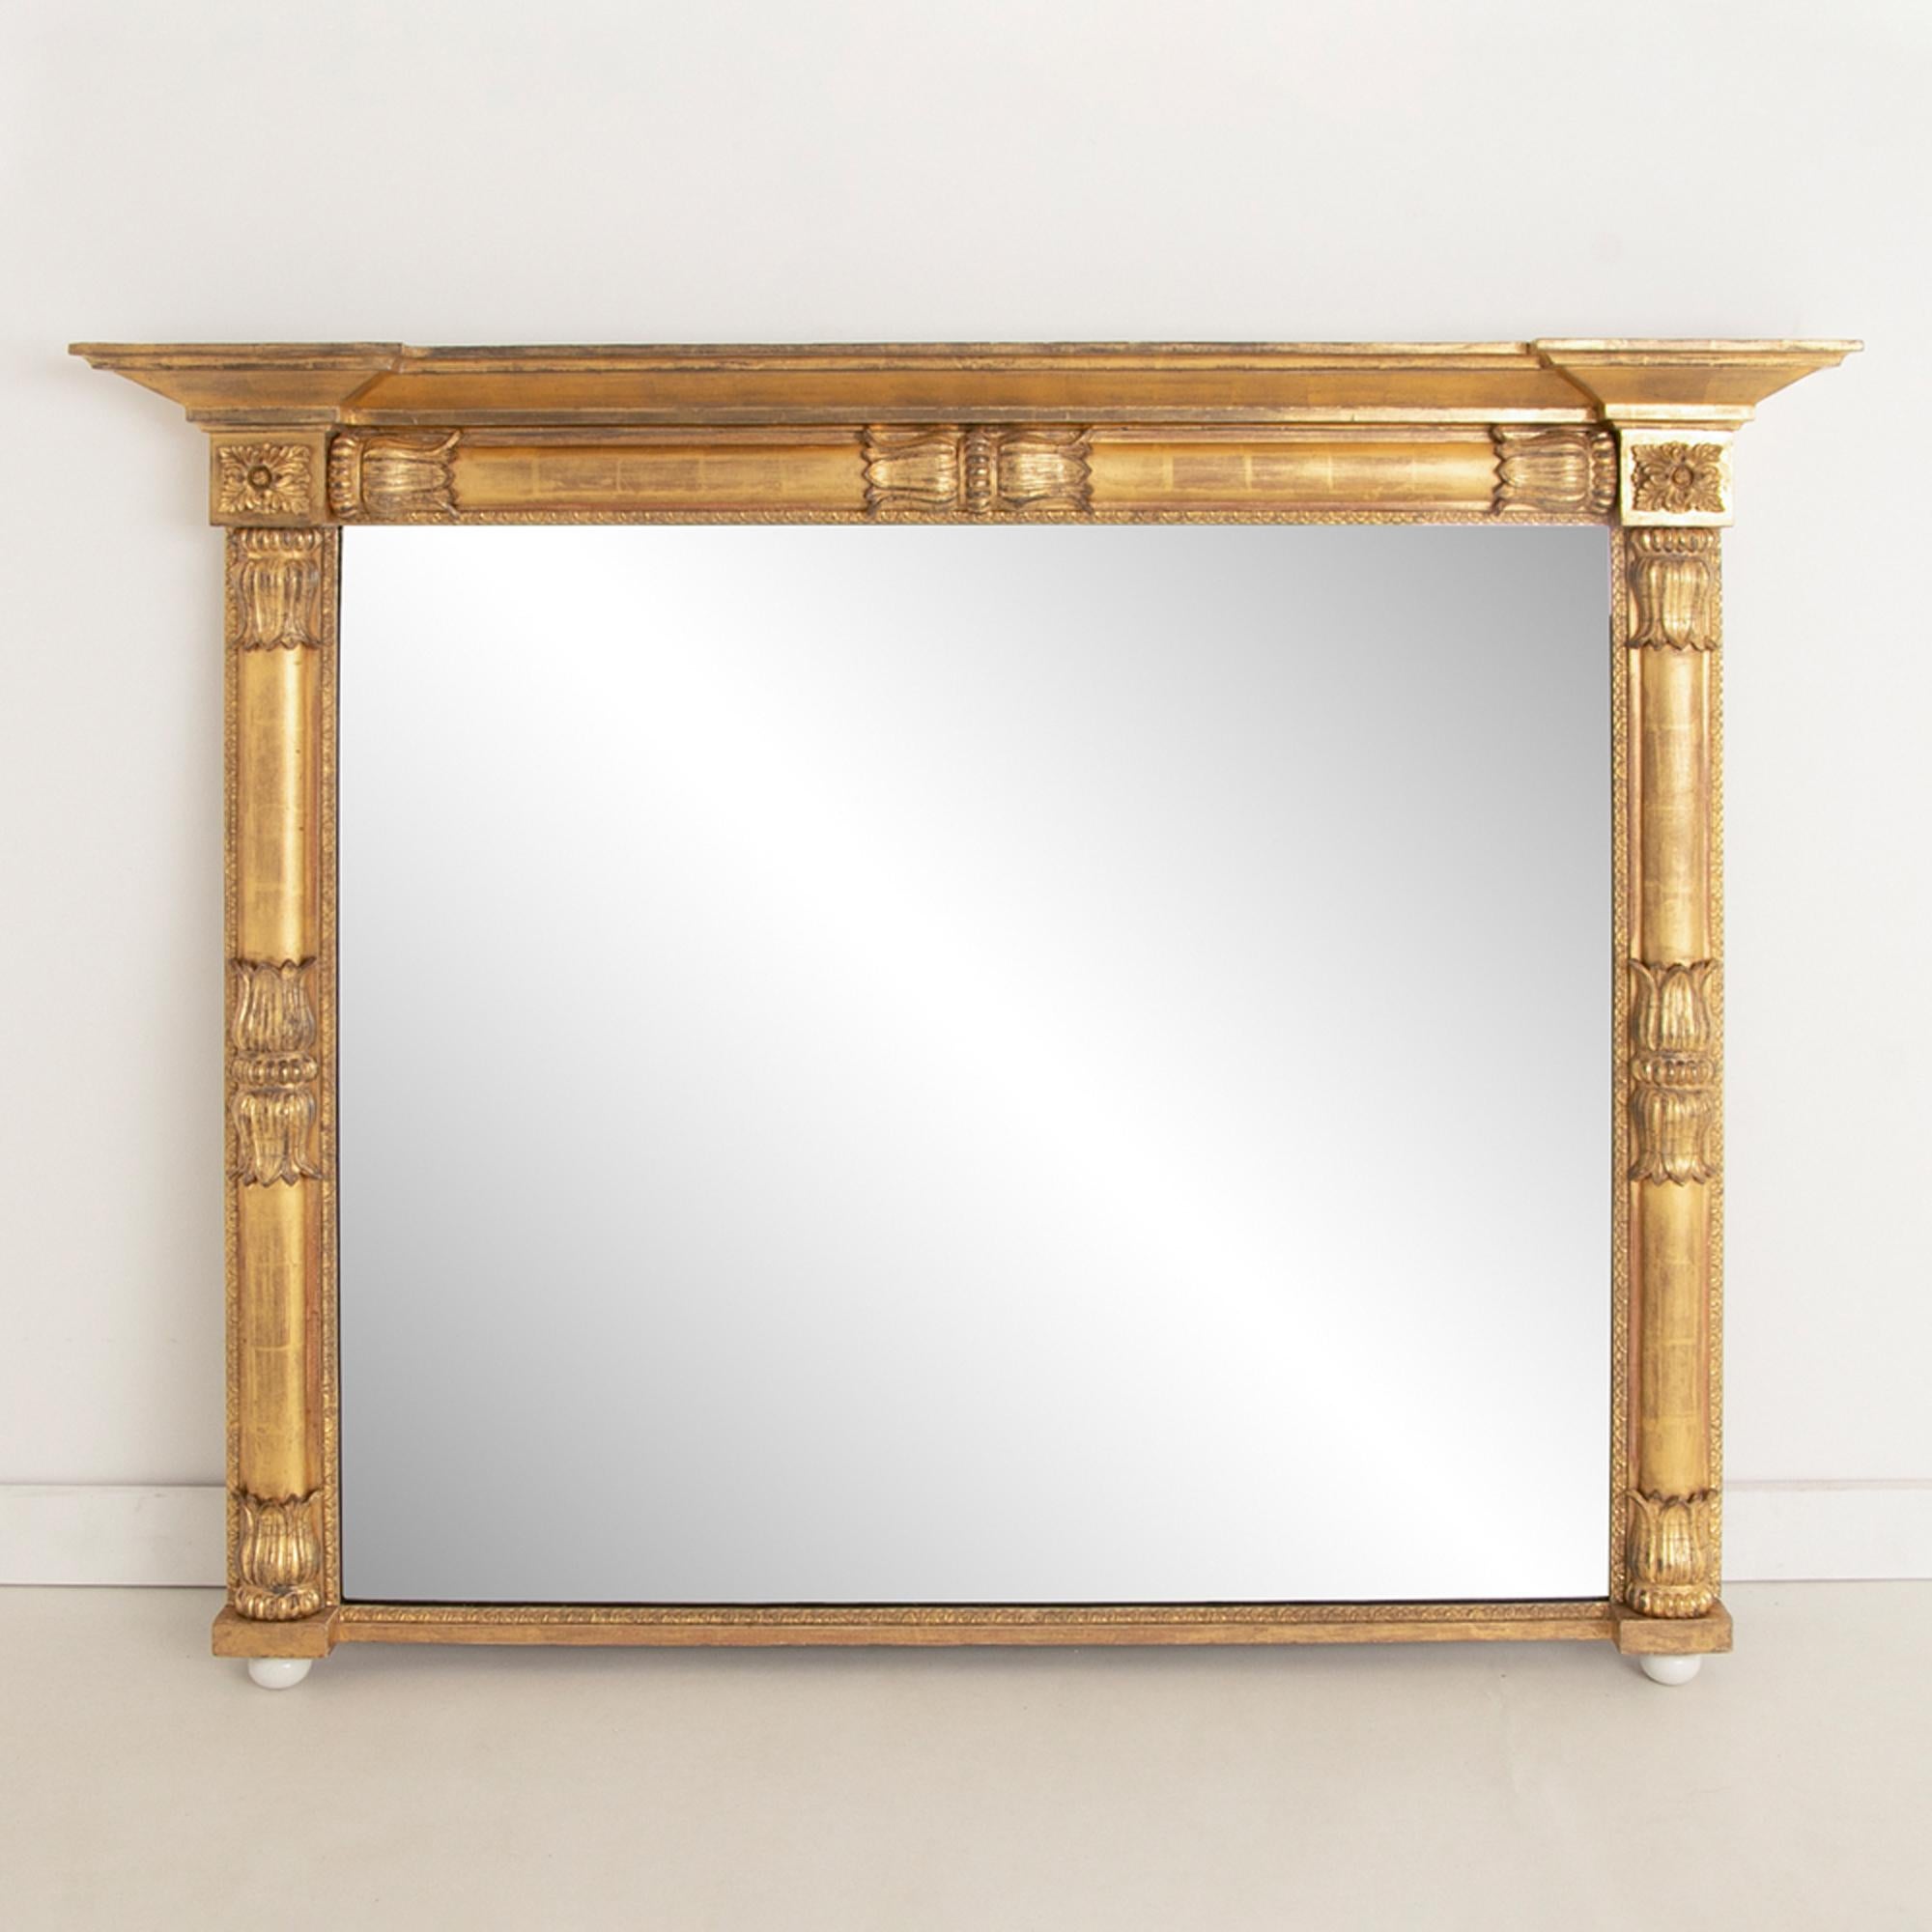 An antique Irish water gilded overmantle mirror with original mercury mirror plate and small areas of Foxing.

All our pieces are restored to the highest standards before sale. We use pure 23½ carat gold to refurbish gilded mirror frames.